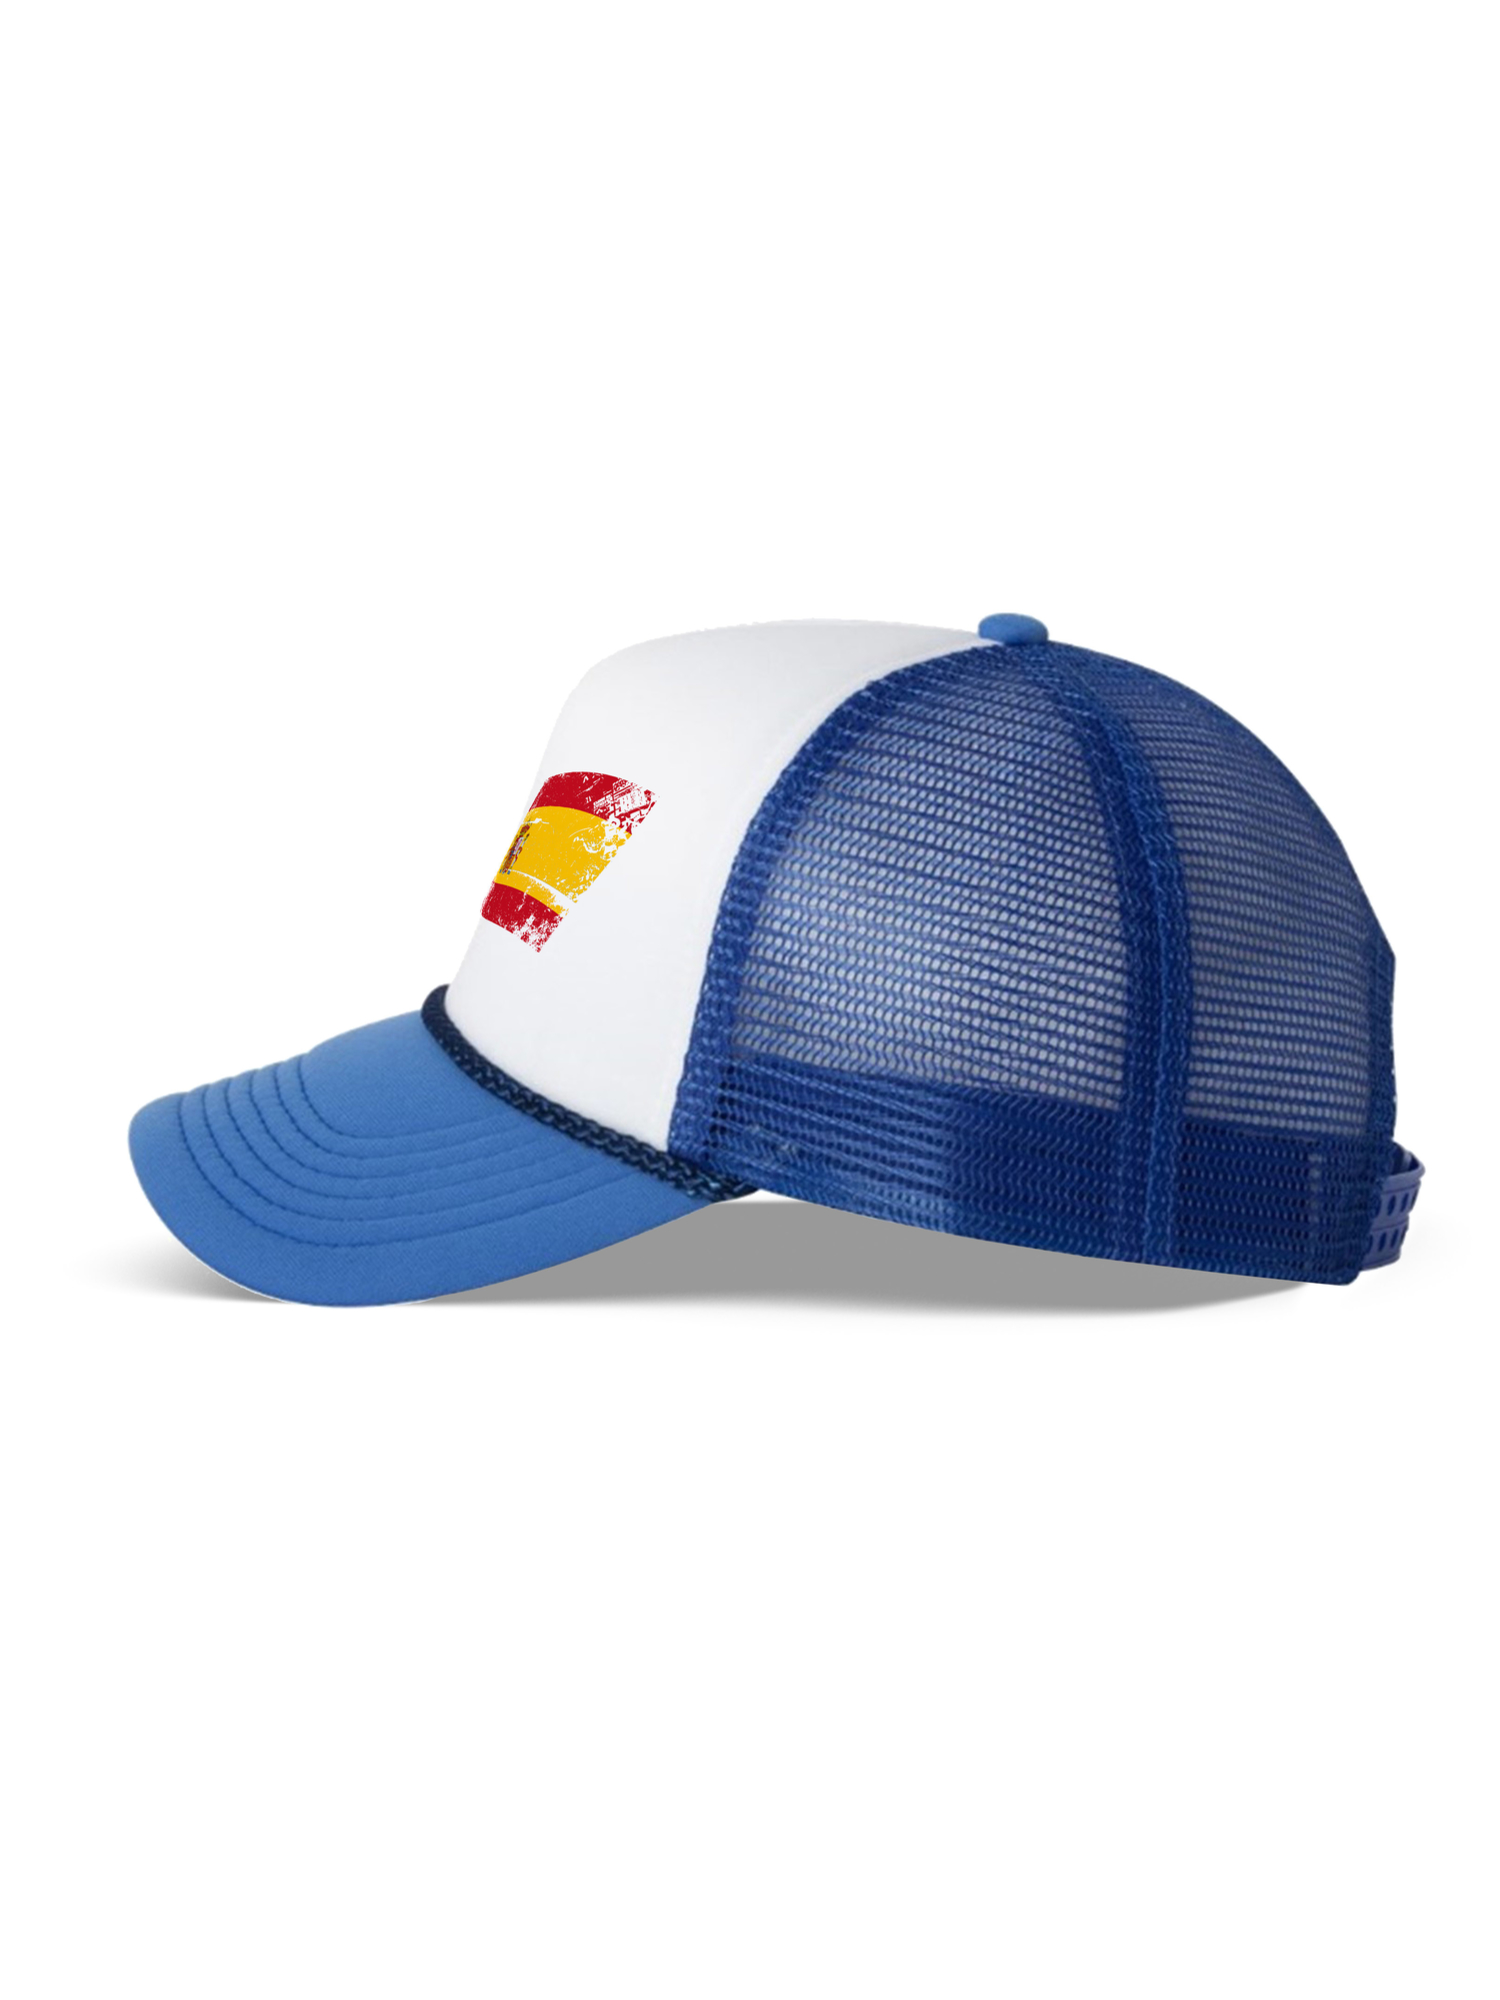 Awkward Styles Spain Flag Hat Spanish Trucker Hat Spain Baseball Cap Amazing Gifts from Spain Spanish Soccer 2018 Hat Spain 2018 Hat for Men and Women Spanish Flag Snapback Hats Spain Gifts - image 3 of 6